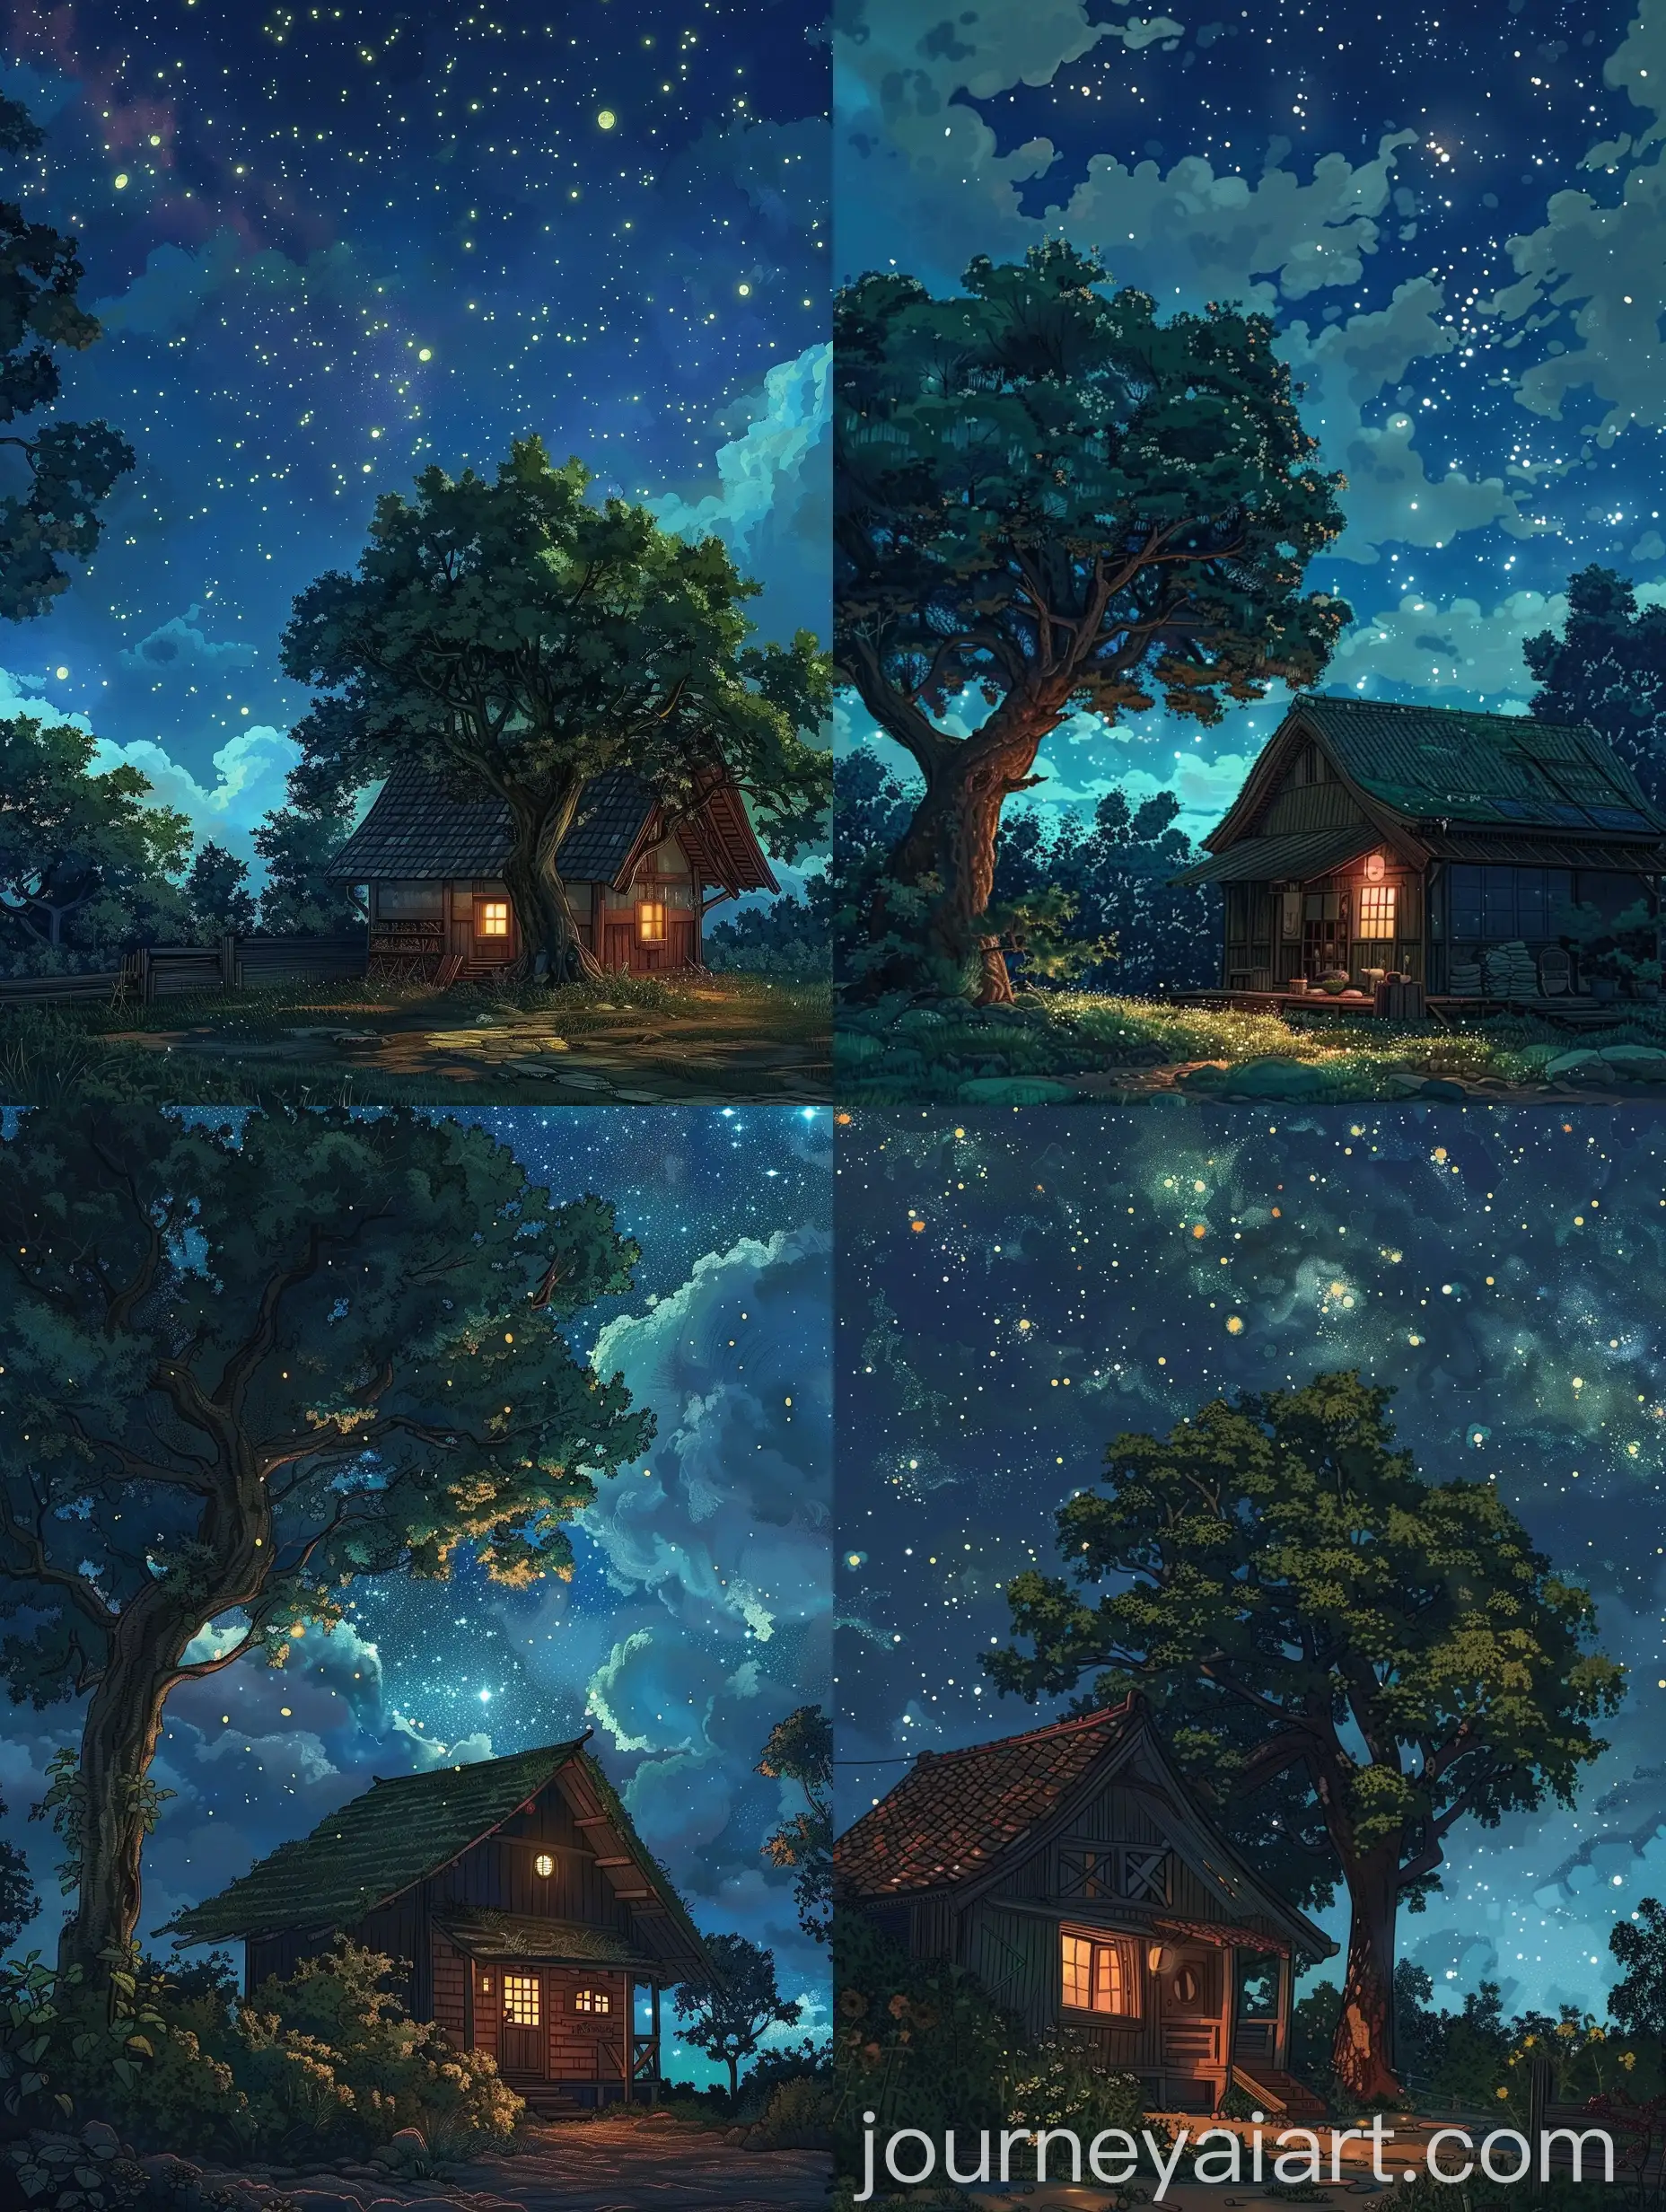 Enchanting-GhibliInspired-Digital-Art-Serene-Night-Sky-with-Cozy-Cottage-and-Lush-Tree